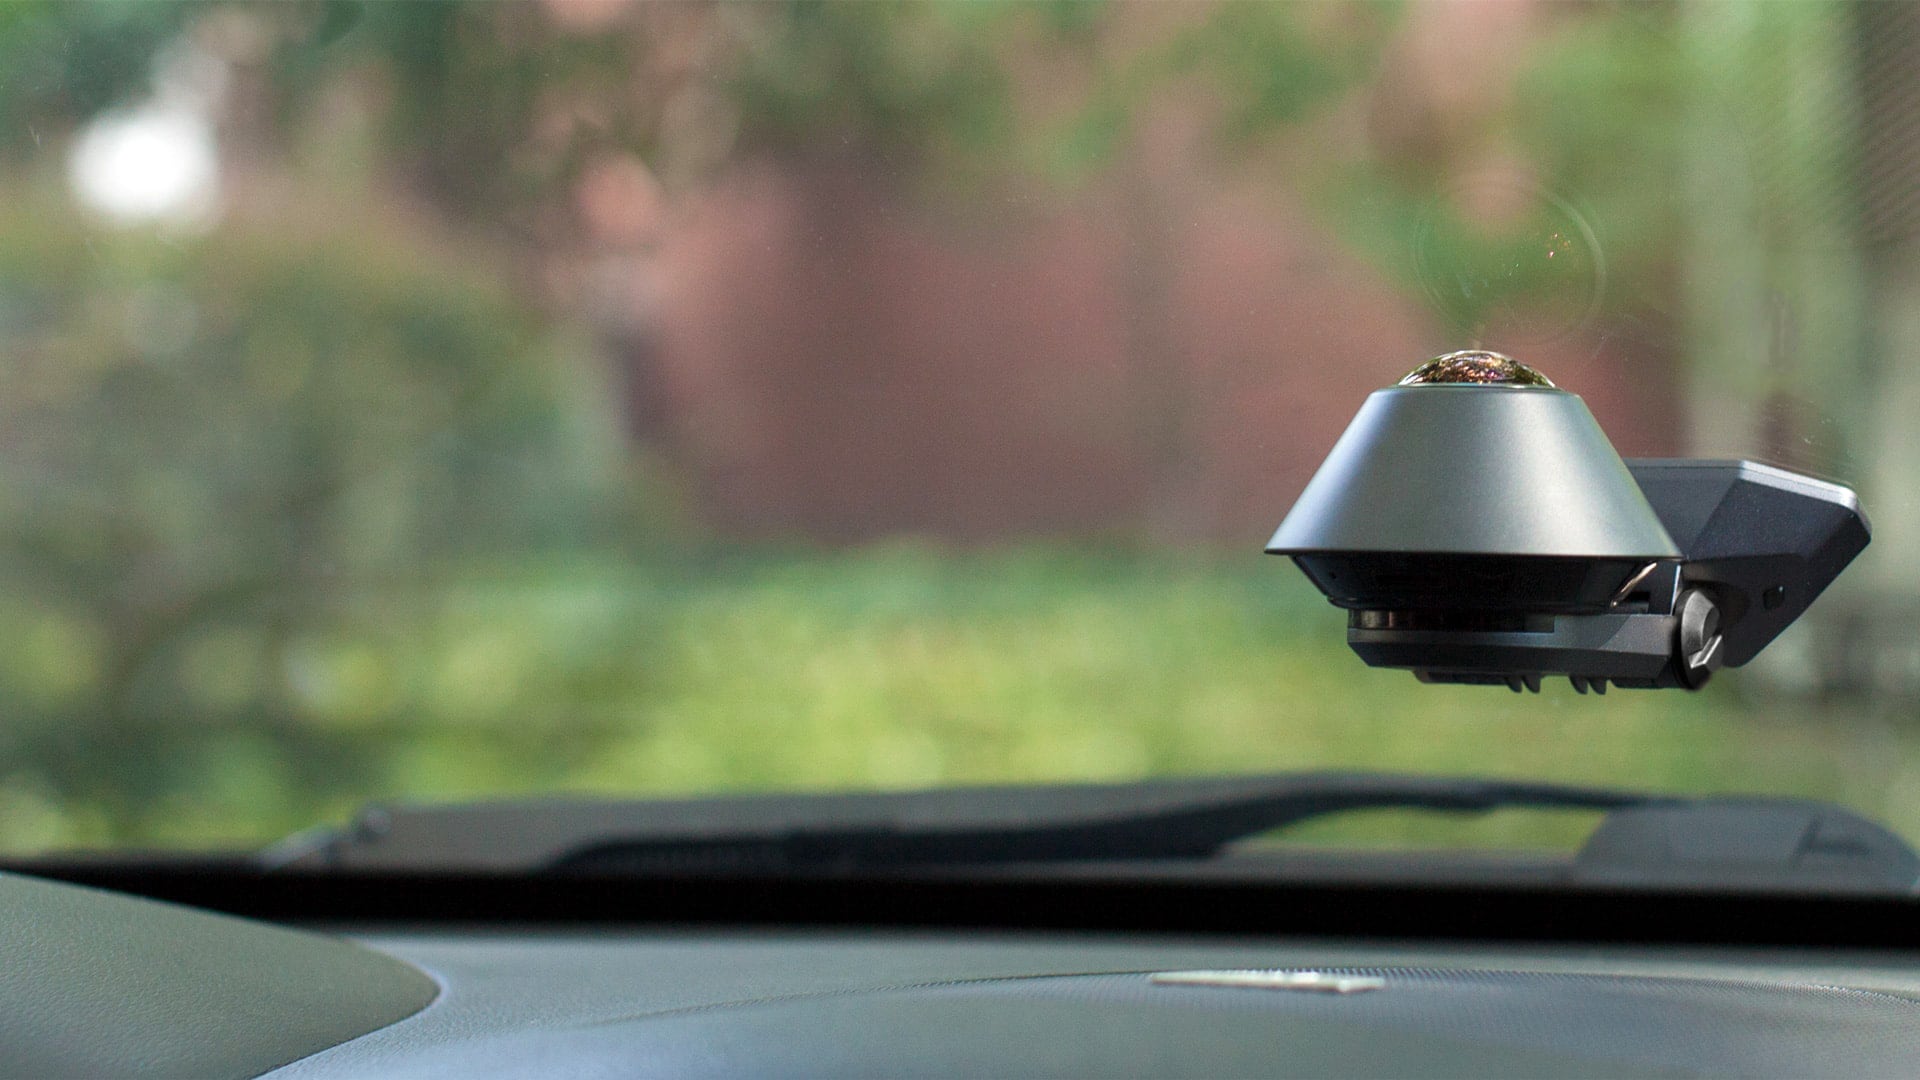 5 Questions to Ask Before Buying a Dash Camera for Your Car